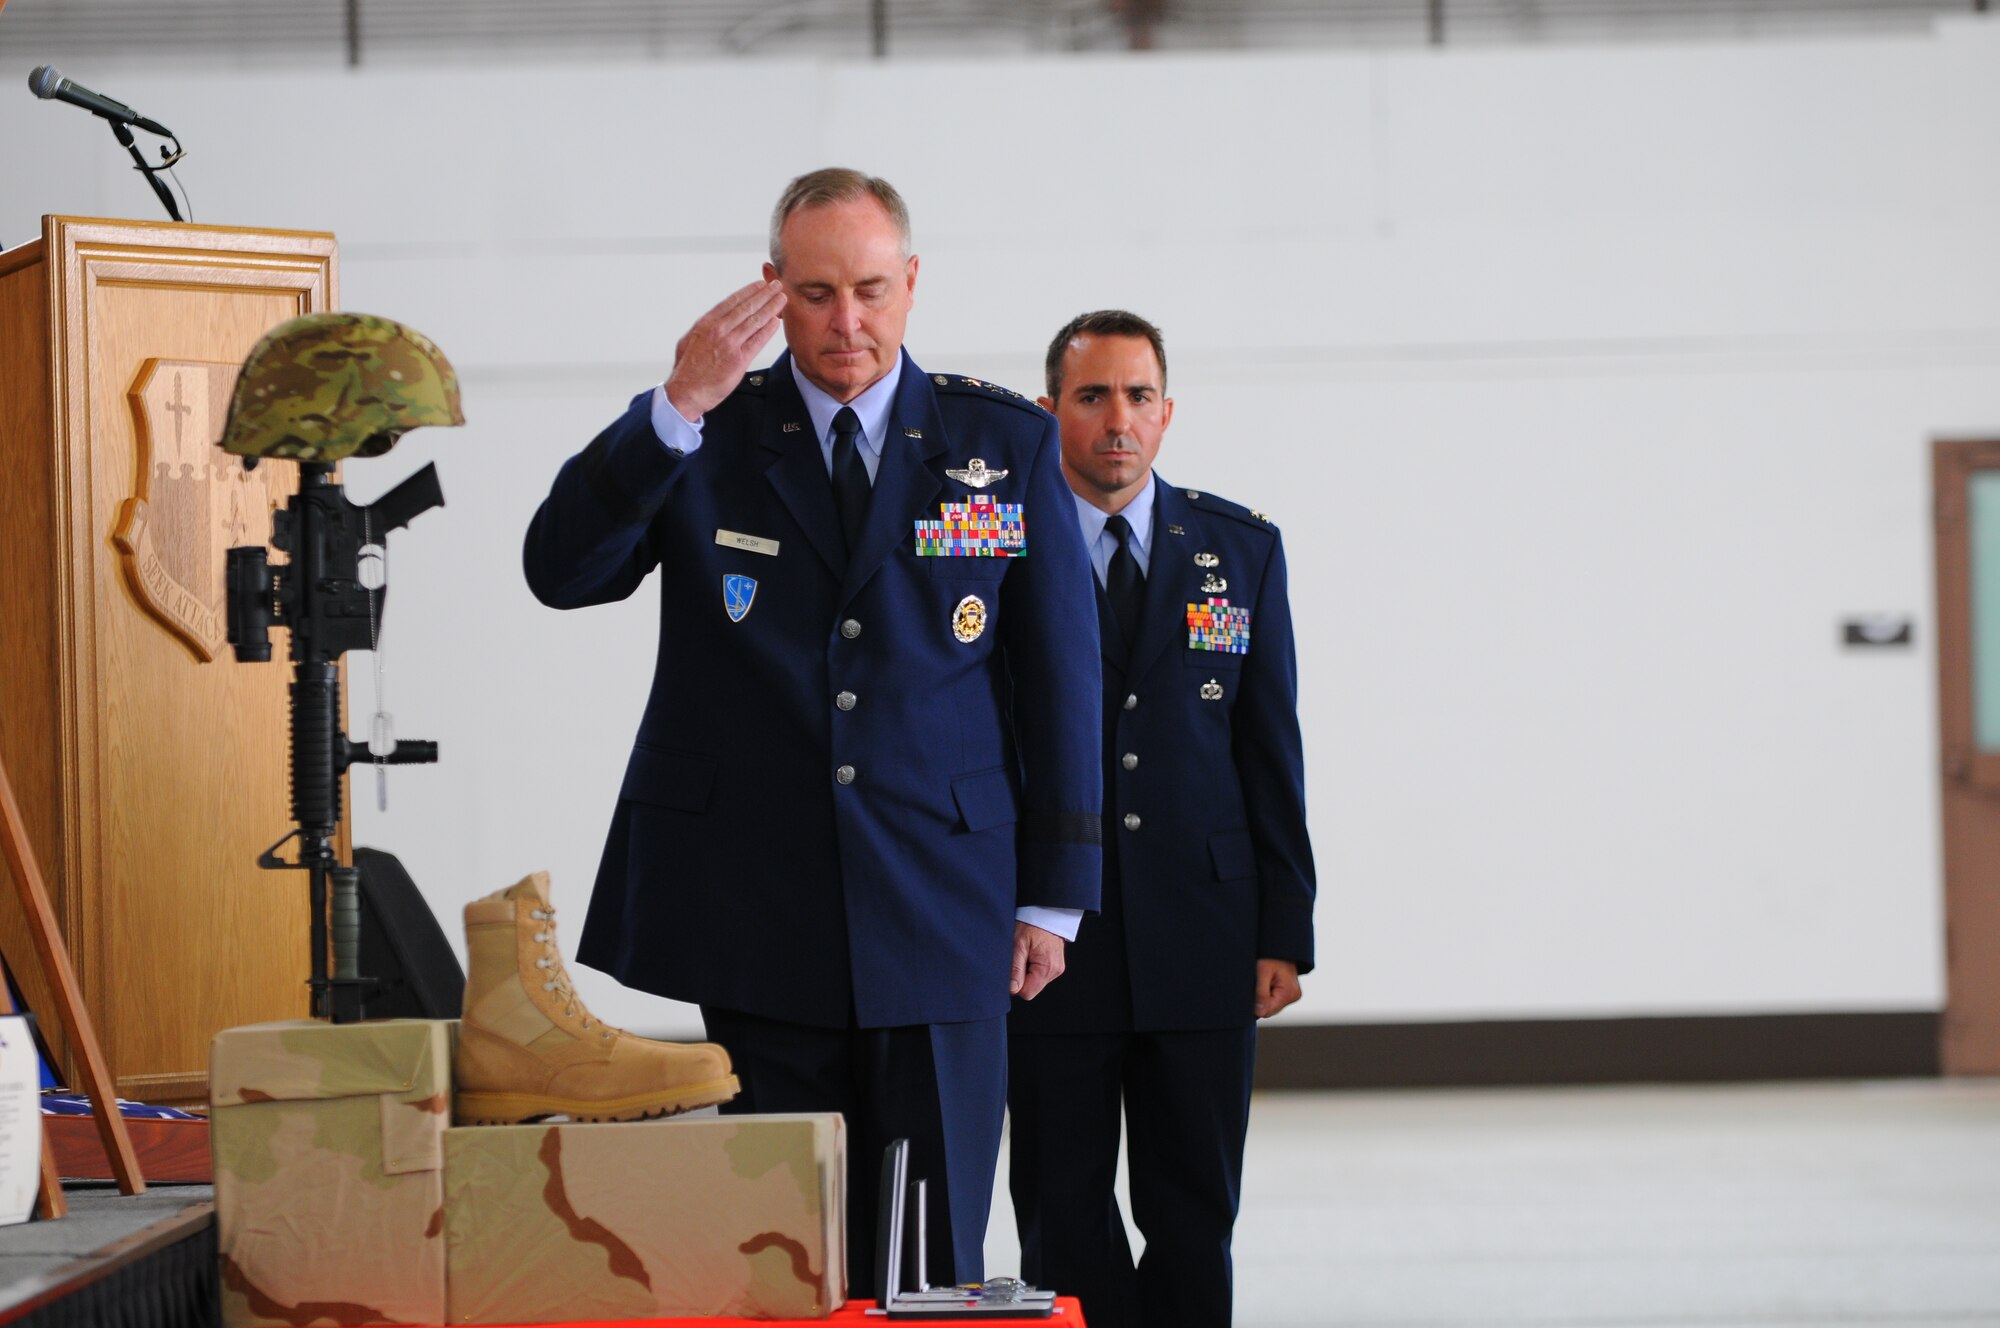 SPANGDAHLEM AIR BASE, Germany – Gen. Mark A. Welsh III, U.S. Air Forces in Europe commander, salutes the Fallen Airman Memorial of Staff Sgt. Joseph J. Hamski, 52nd Civil Engineer Squadron Explosive Ordnance Disposal Flight, after posthumously presenting him the Bronze Star, Purple Heart and Air Force Commendation Medals during Sergeant Hamski’s memorial service here June 16. Sergeant Hamski was killed in action May 26, 2011, in Shorabak, Afghanistan, while responding to a known enemy weapons cache. (U.S. Air Force photo/Airman 1st Class Dillon Davis)